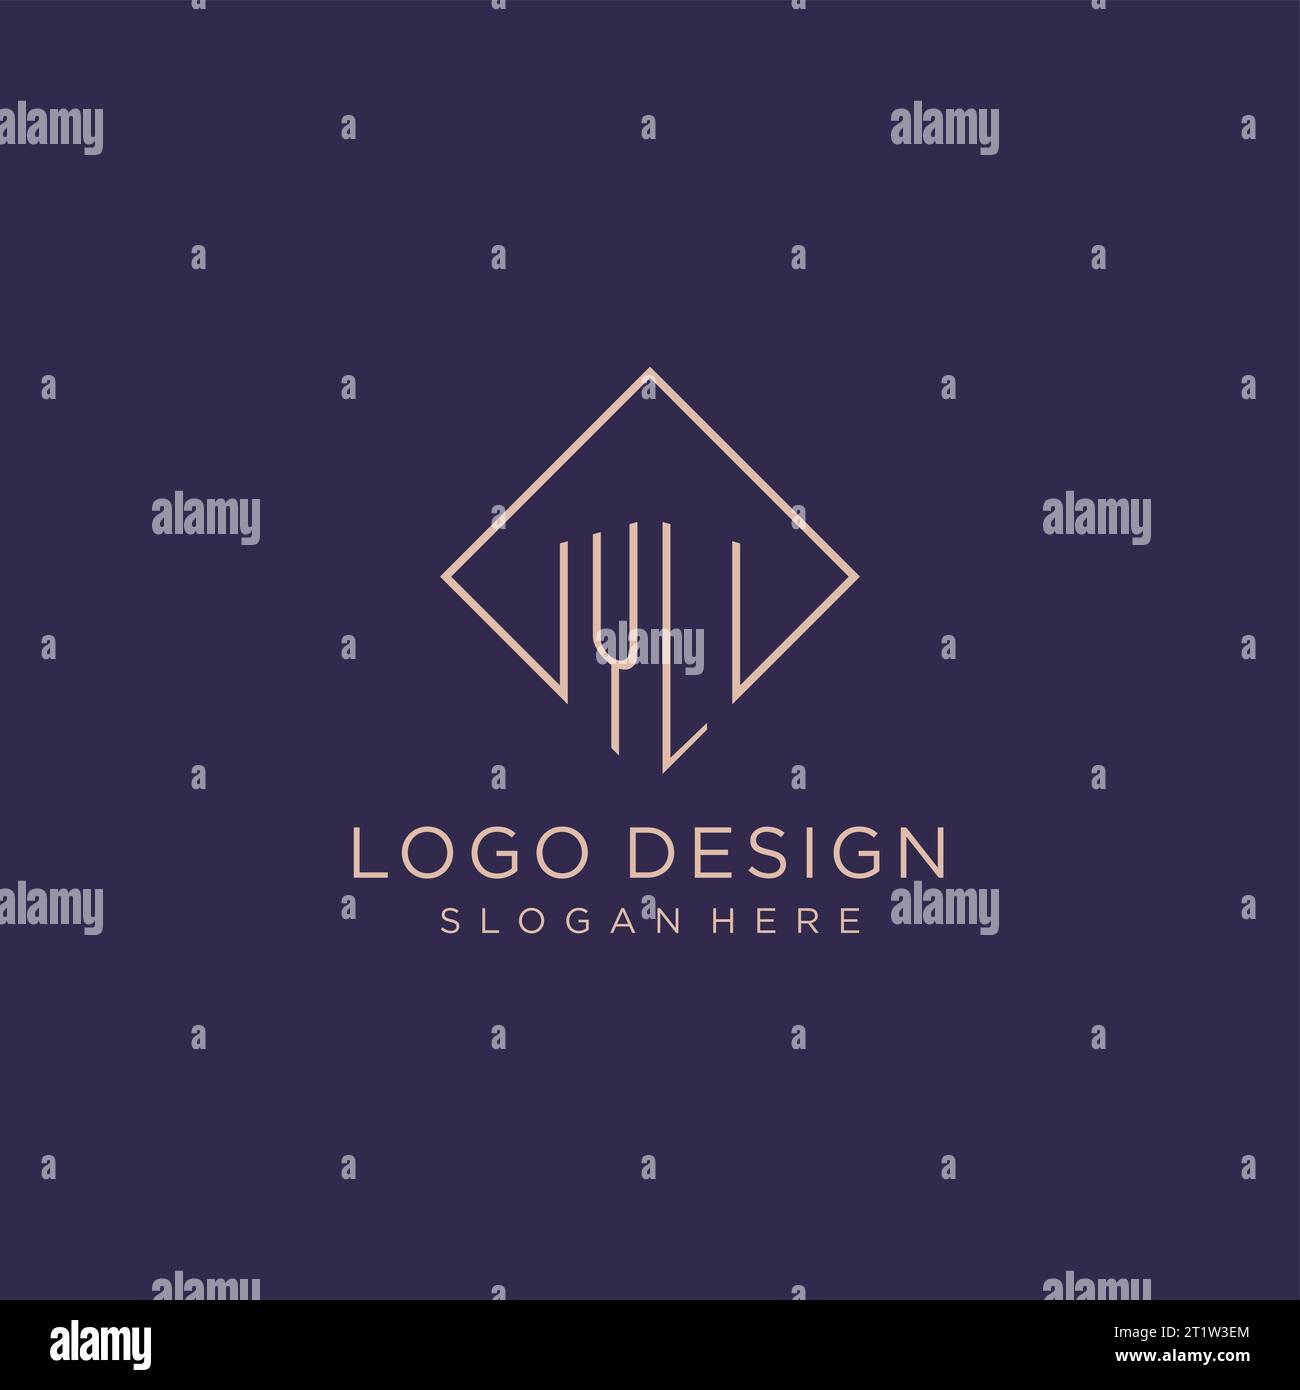 1,332 Logo Yl Images, Stock Photos, 3D objects, & Vectors